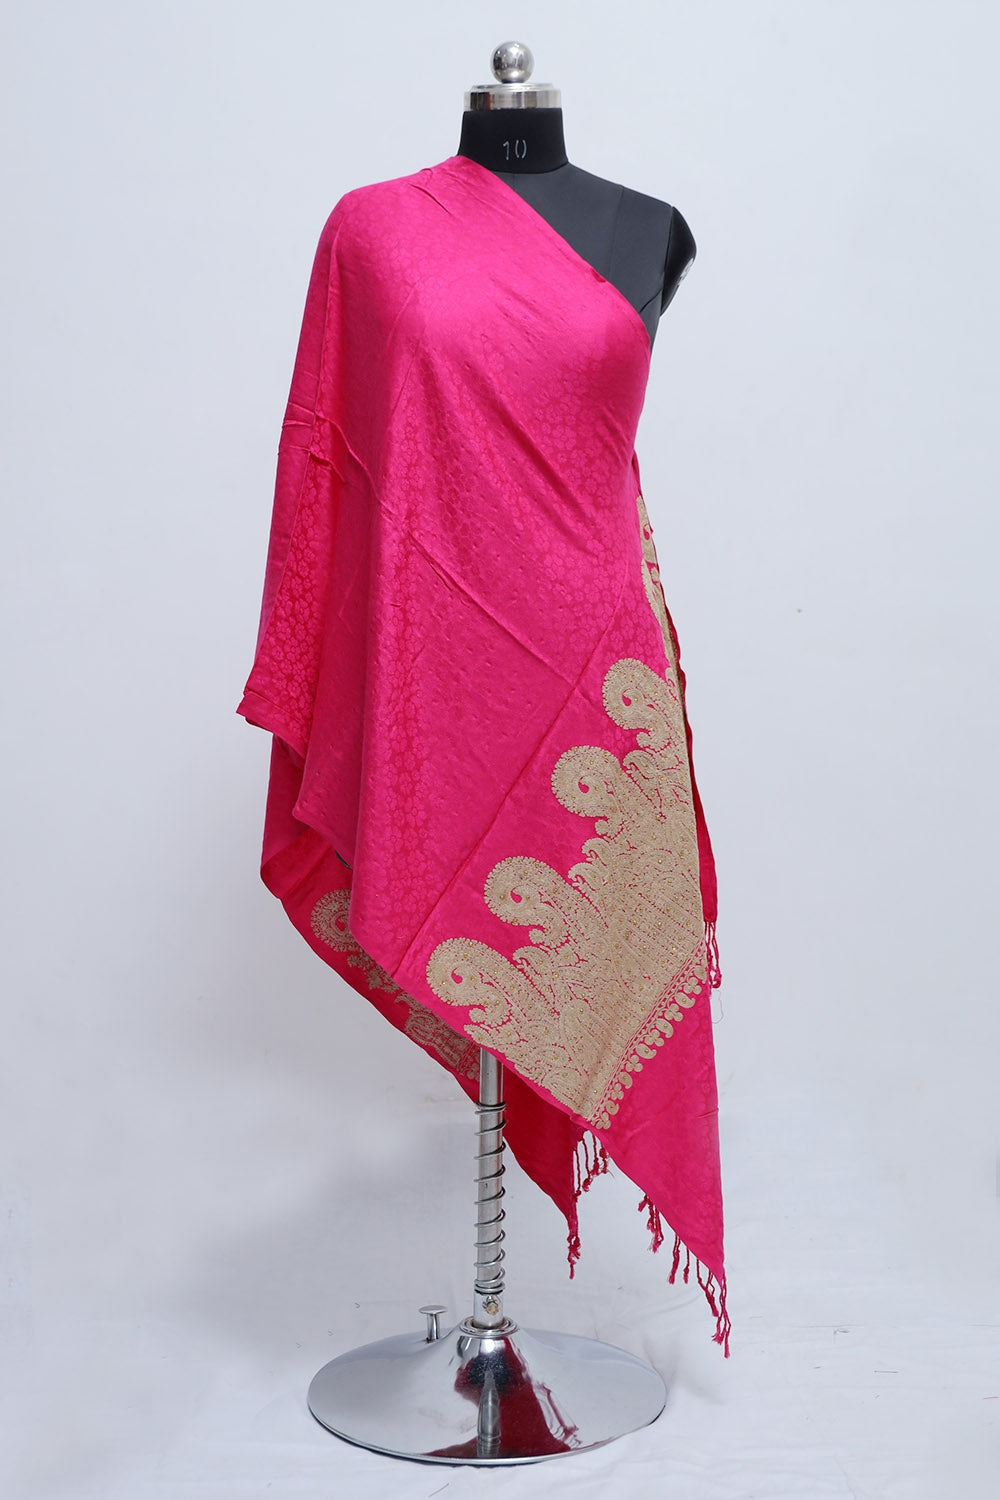 Carrot Colour Stole Enriched With Beautiful Aari Embroidery